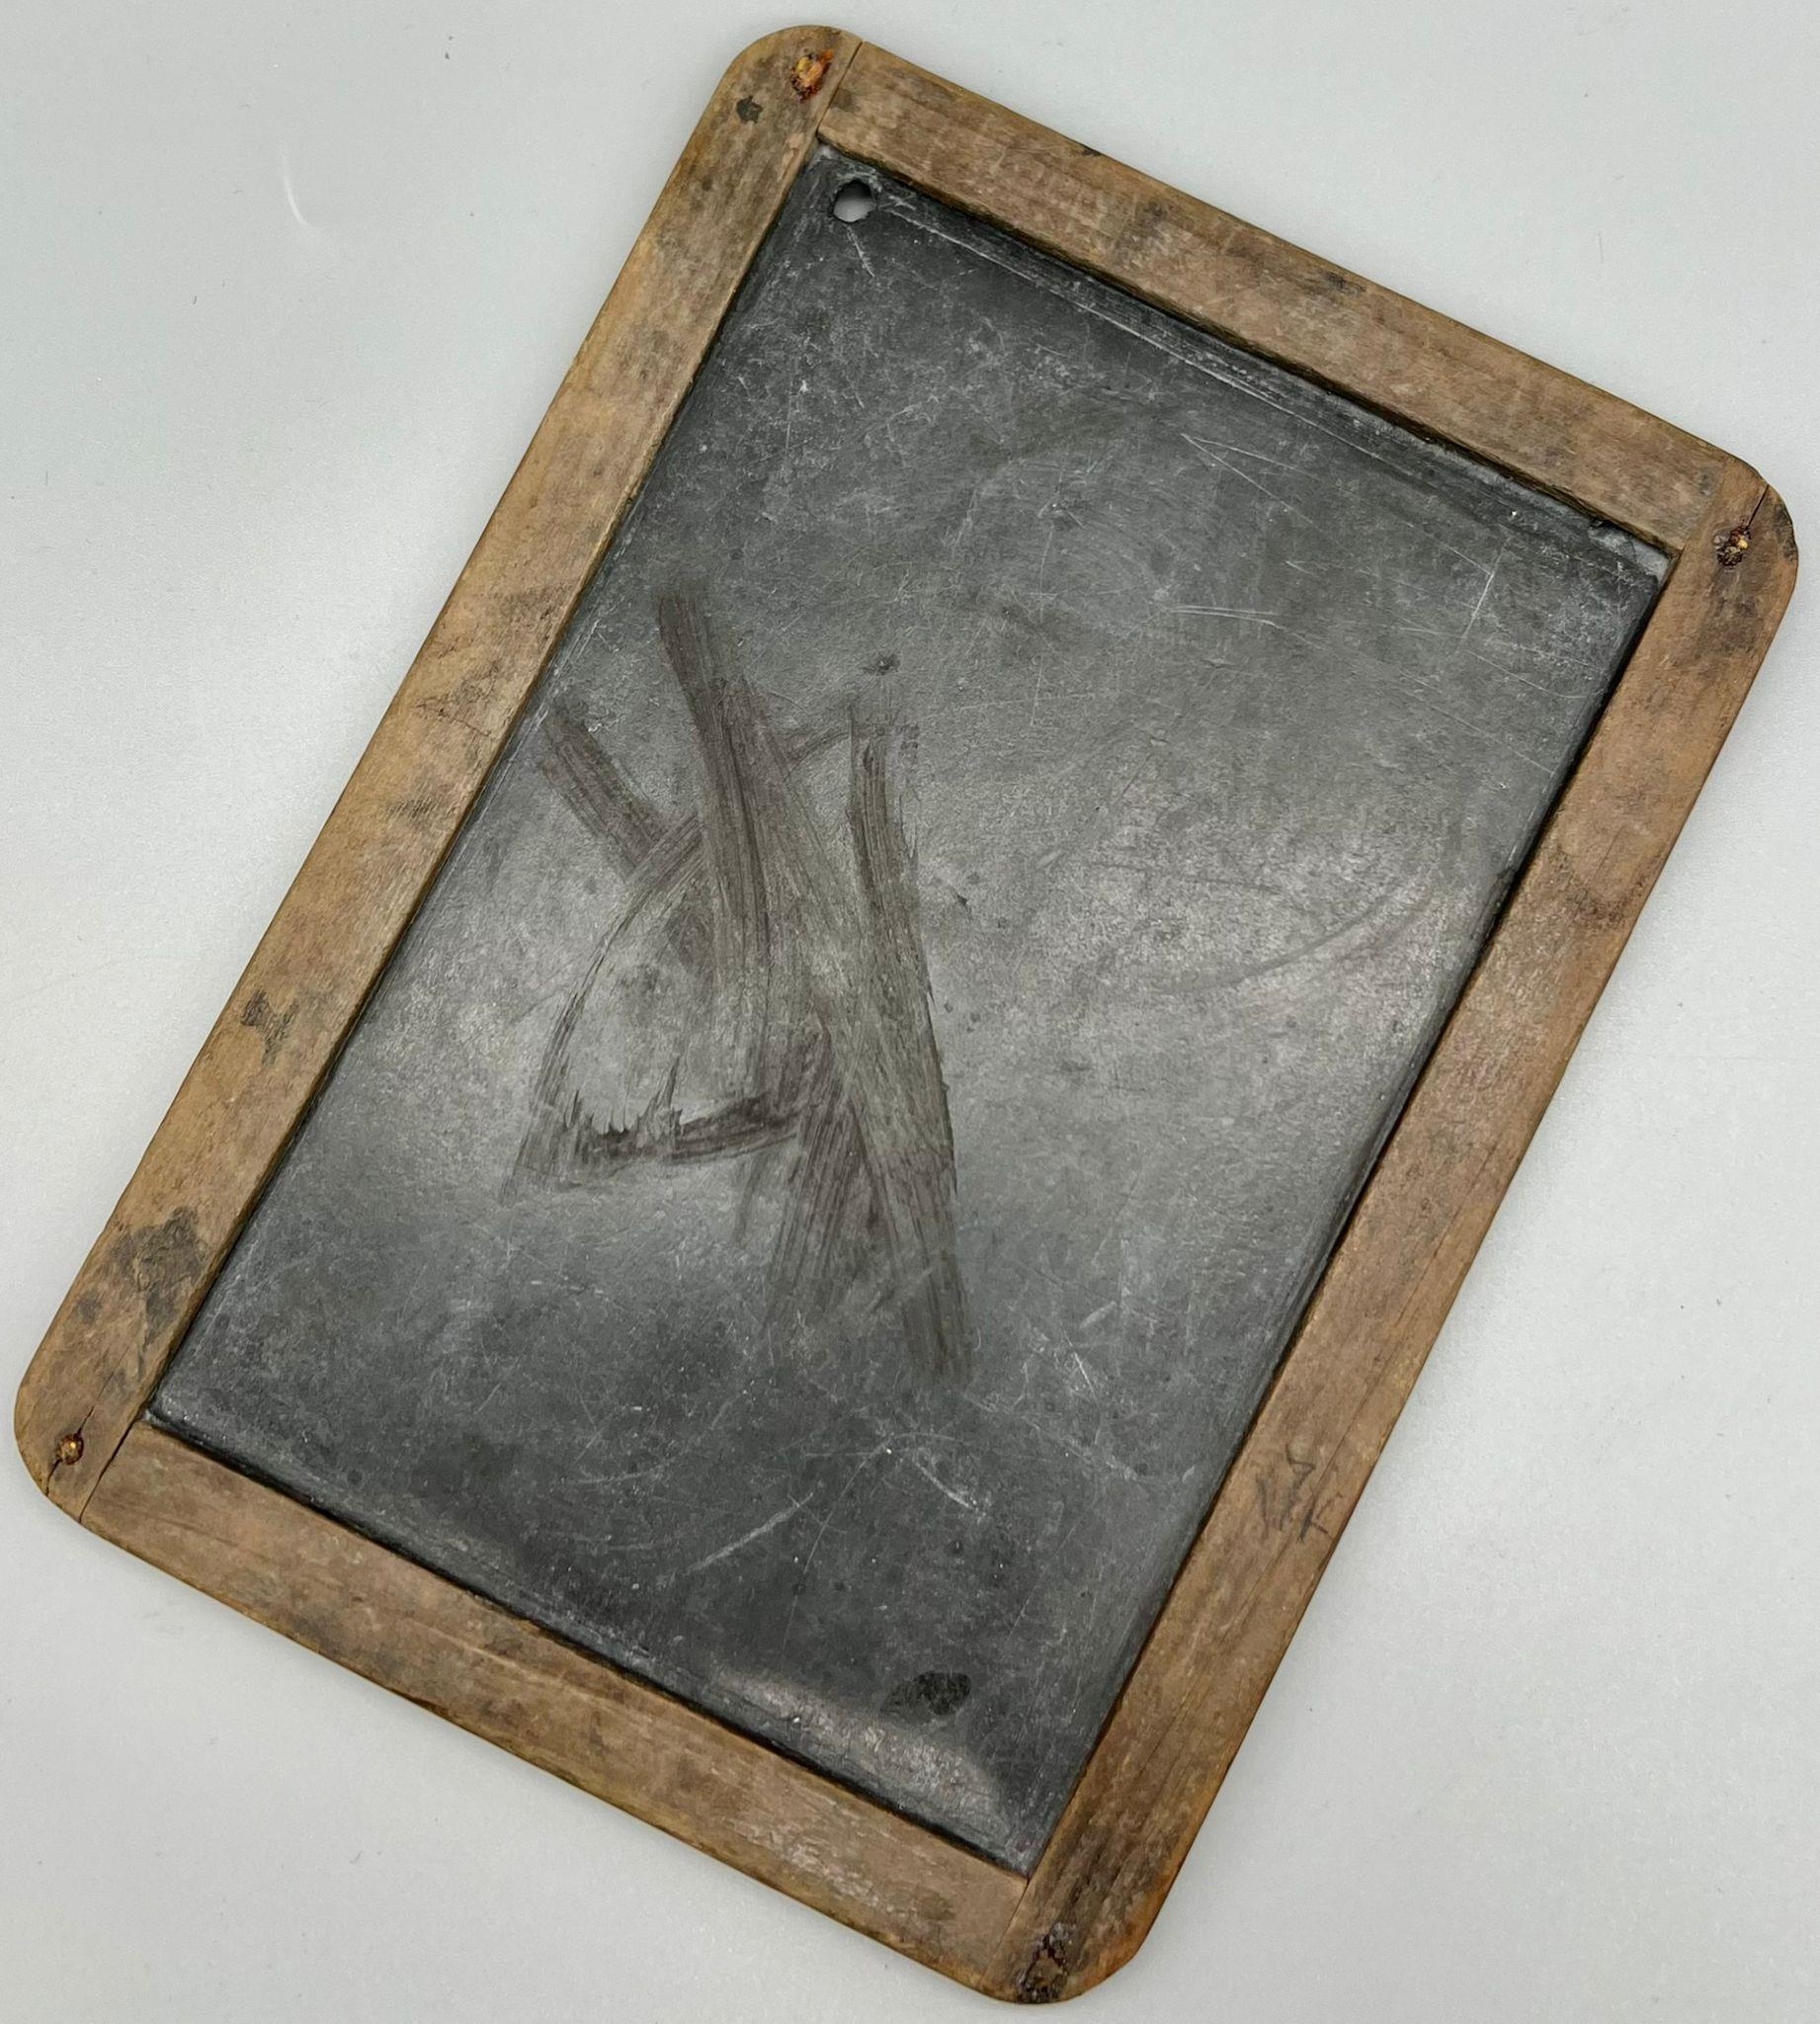 A RARE ANTIQUE 1800'S BUDDHIST TEMPLE SCHOOL CHILDS SLATE BOARD IN WOODEN FRAME. 17 X 23cms APPROX - Image 2 of 3